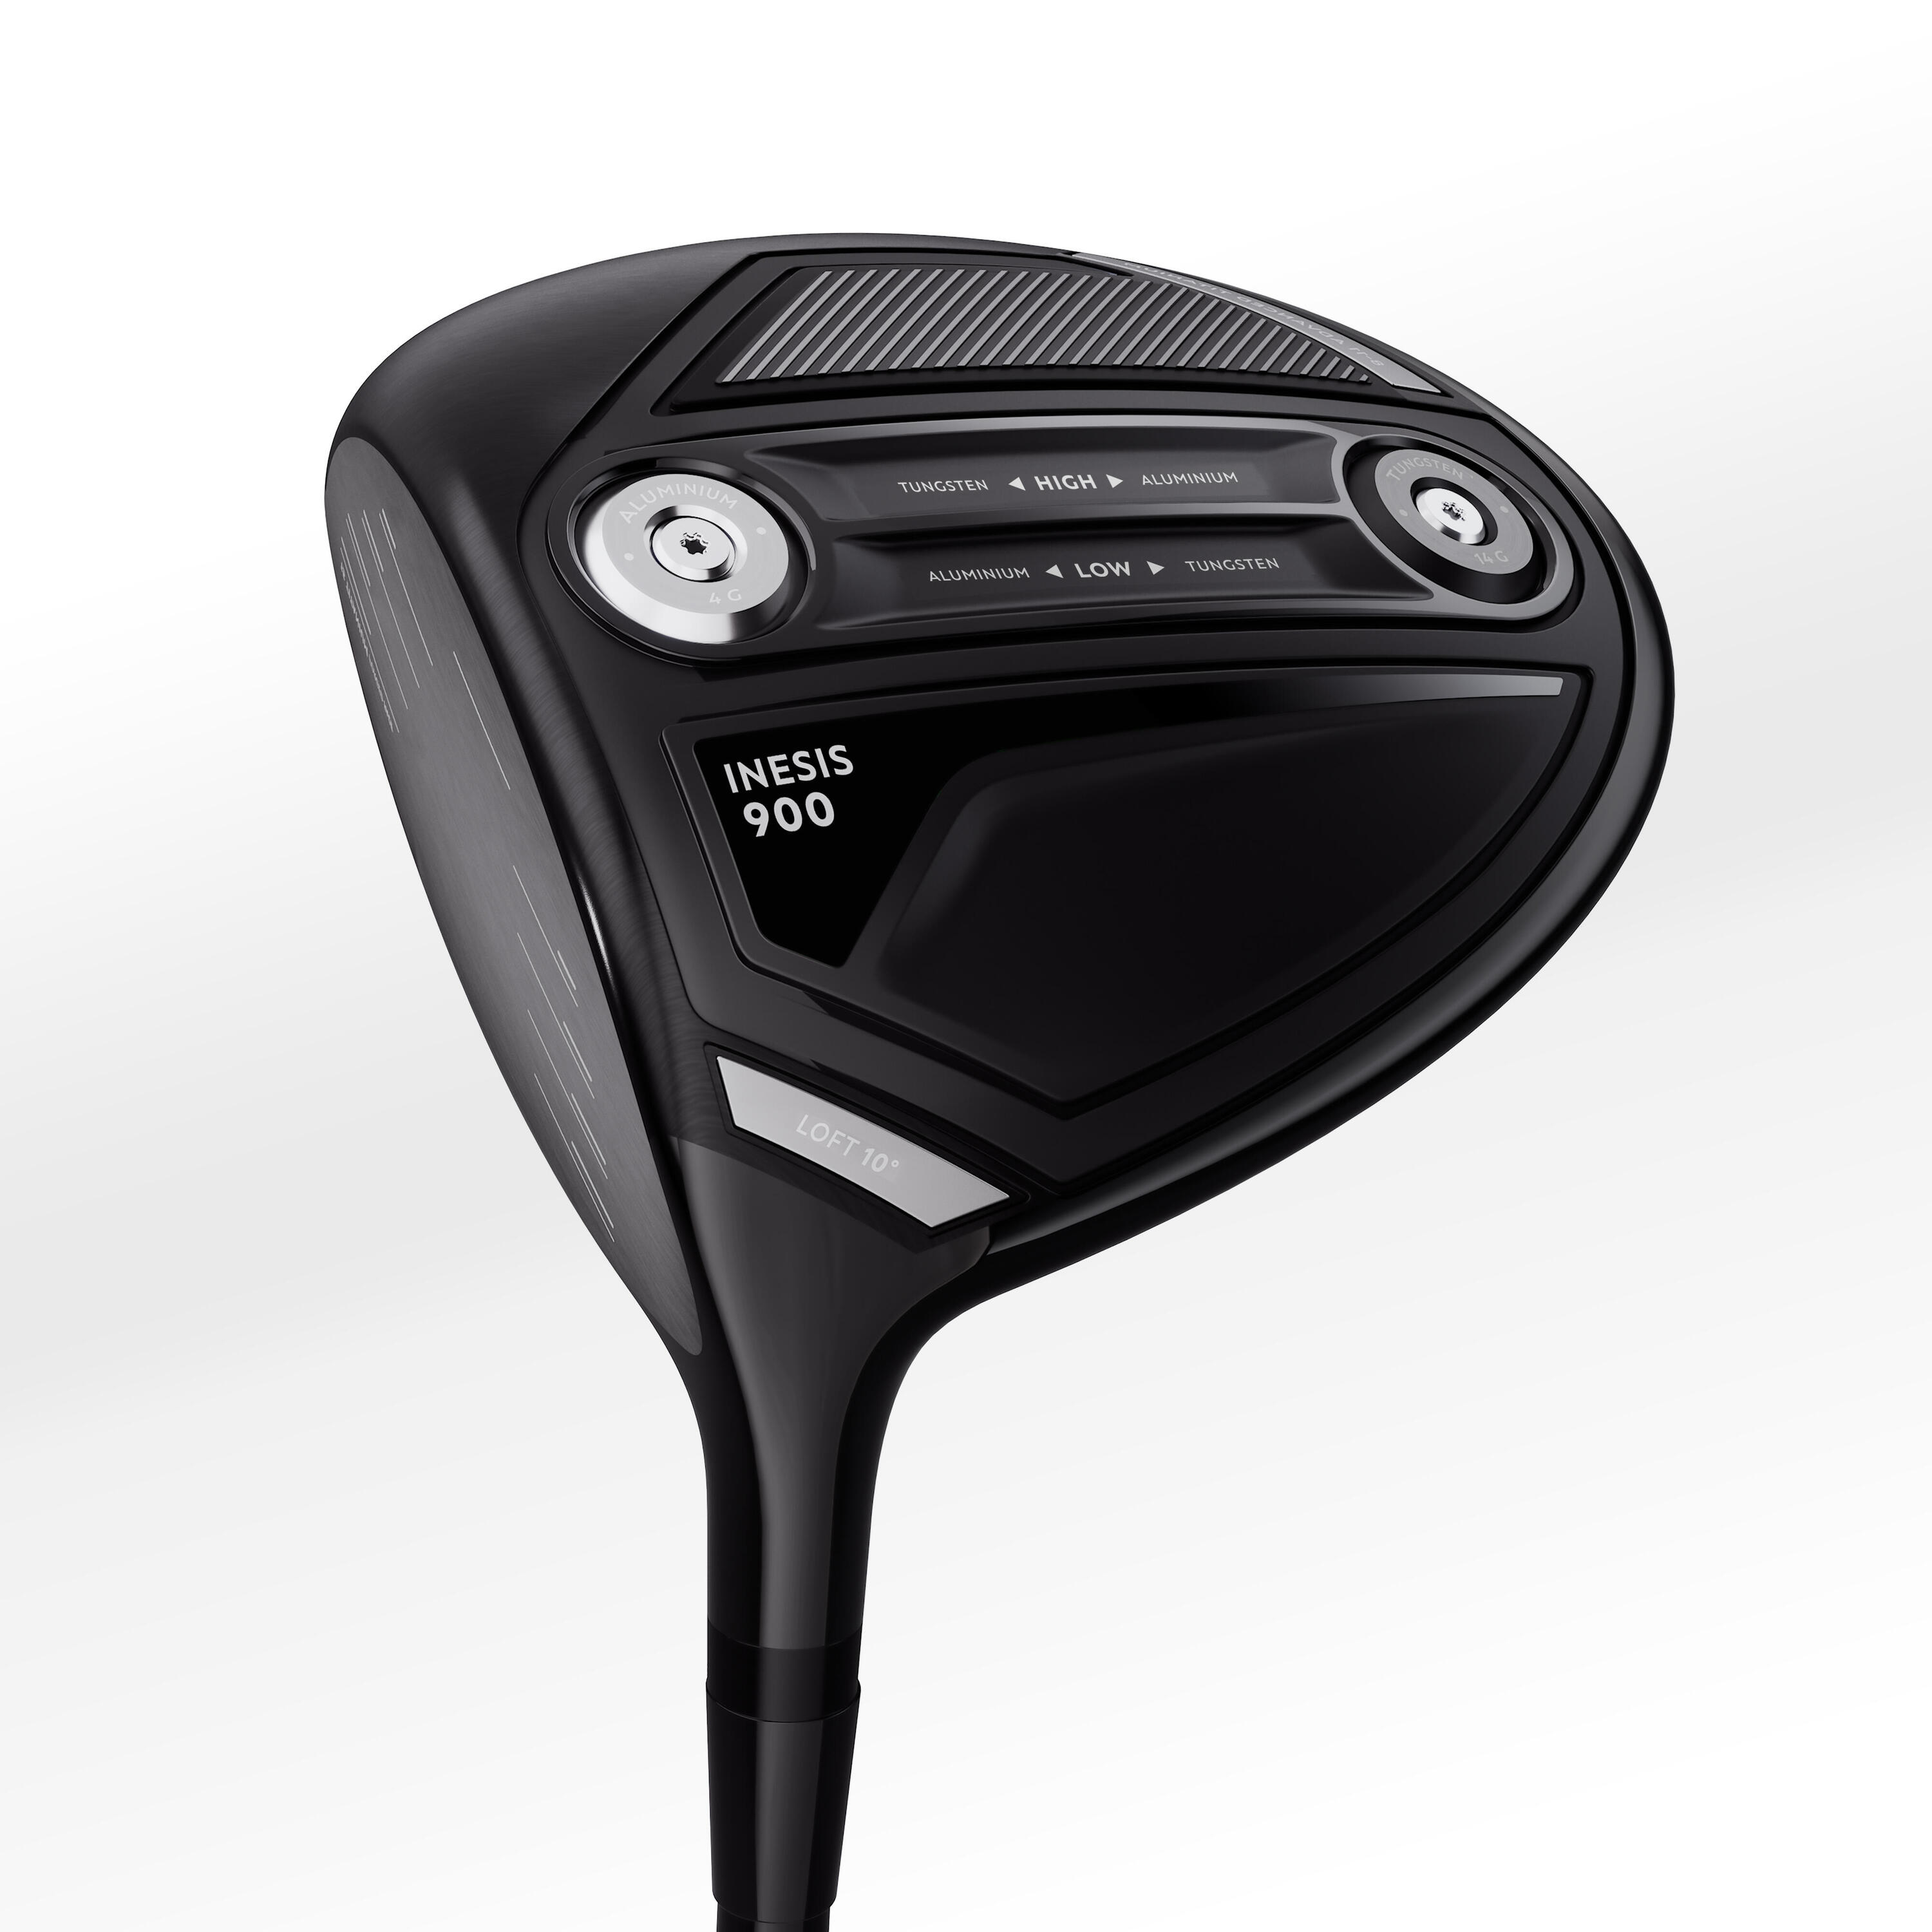 Golf driver left handed high speed - INESIS 900 1/8